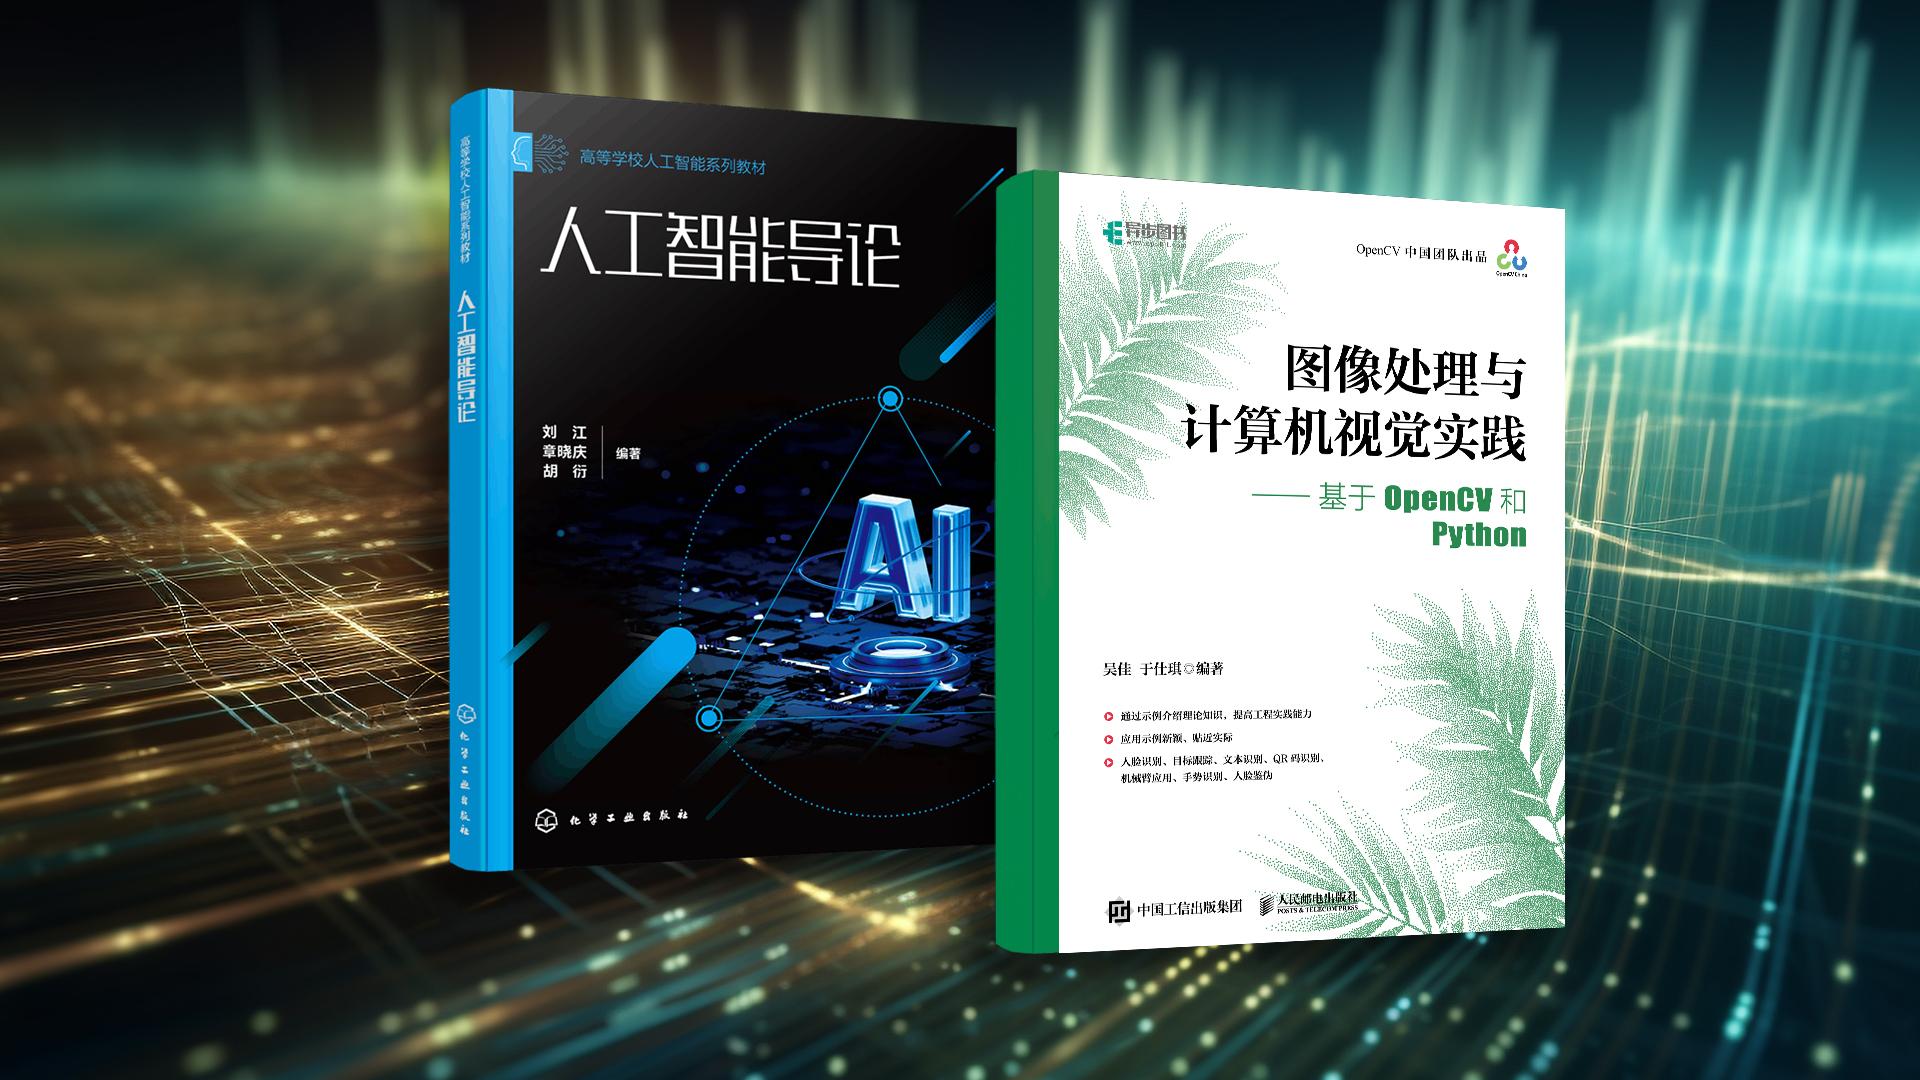 SUSTech’s Department of Computer Science and Engineering publishes series of textbooks